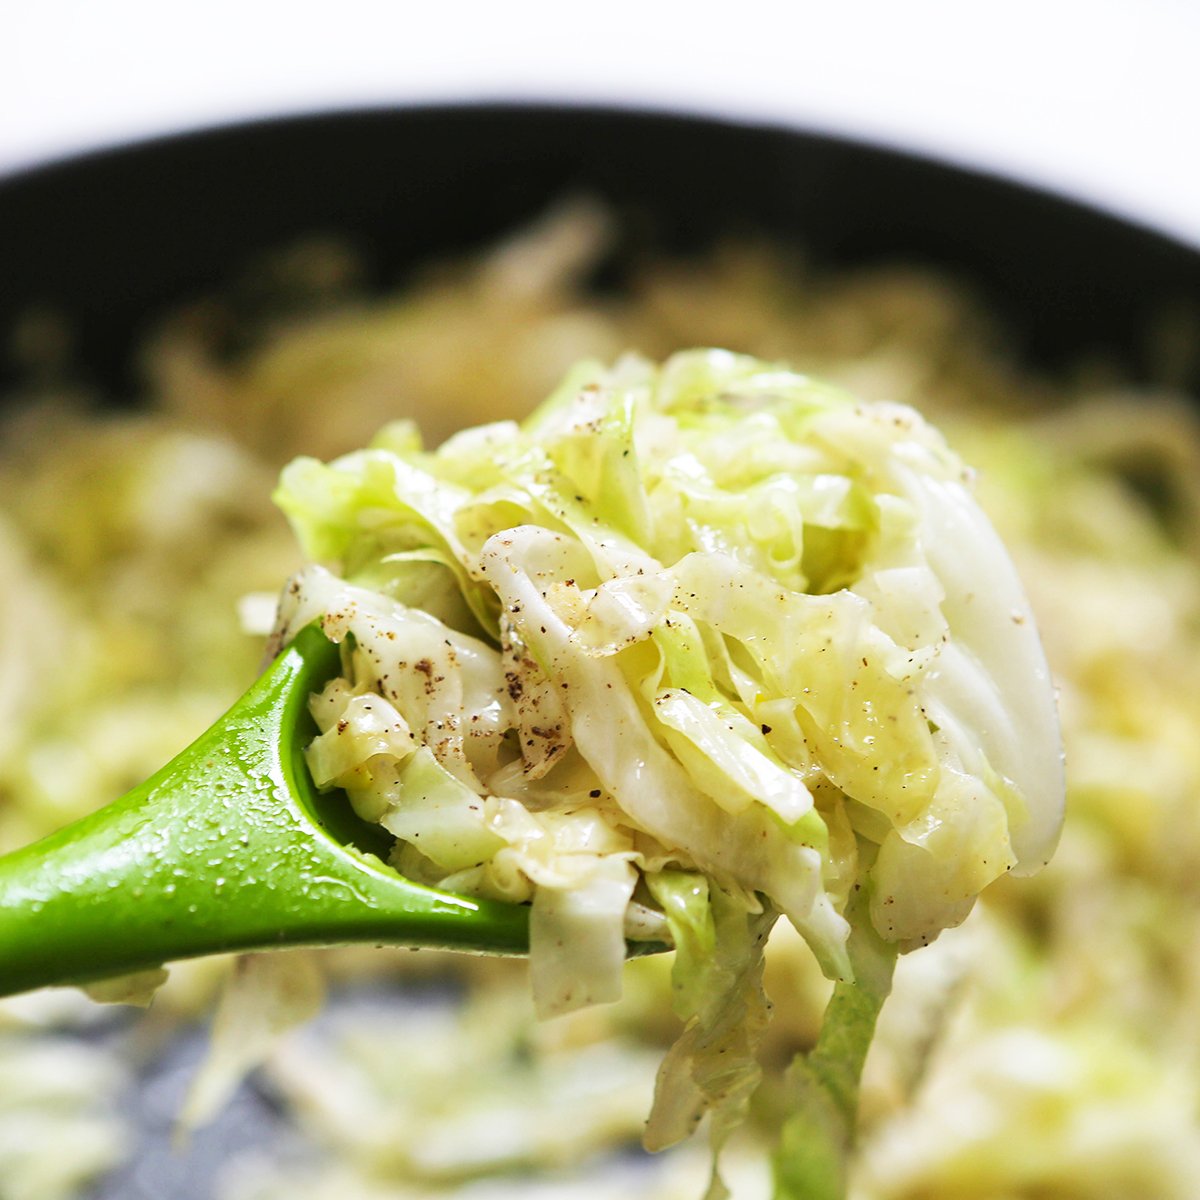 Spoon of sauteed cabbage being pulled from pan.